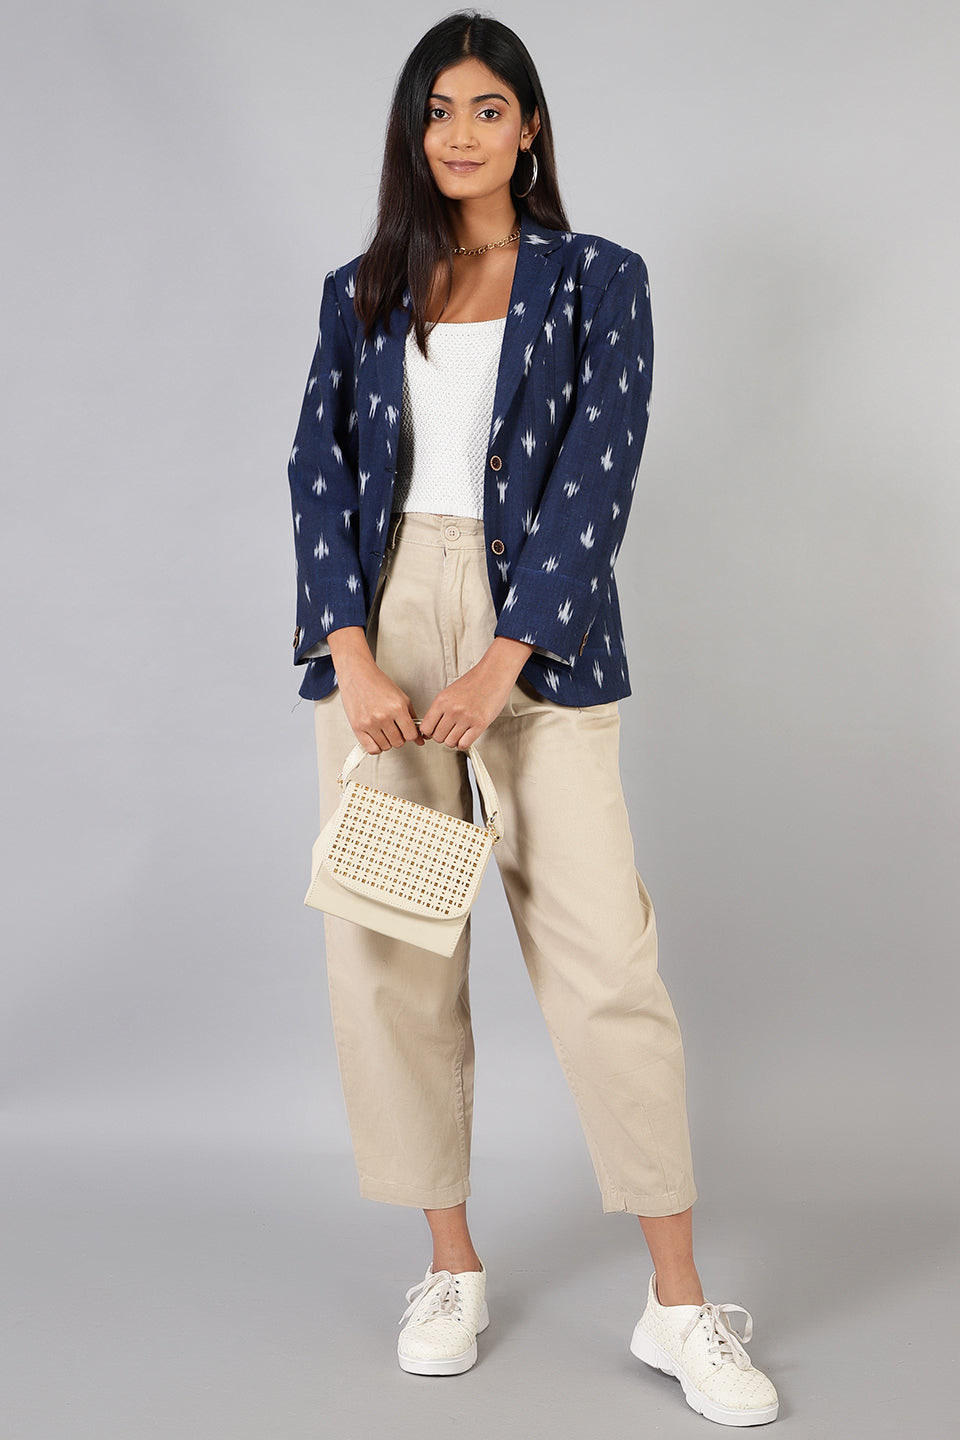 Mariner Blue Blazer Open front Outwear With Pockets For Women